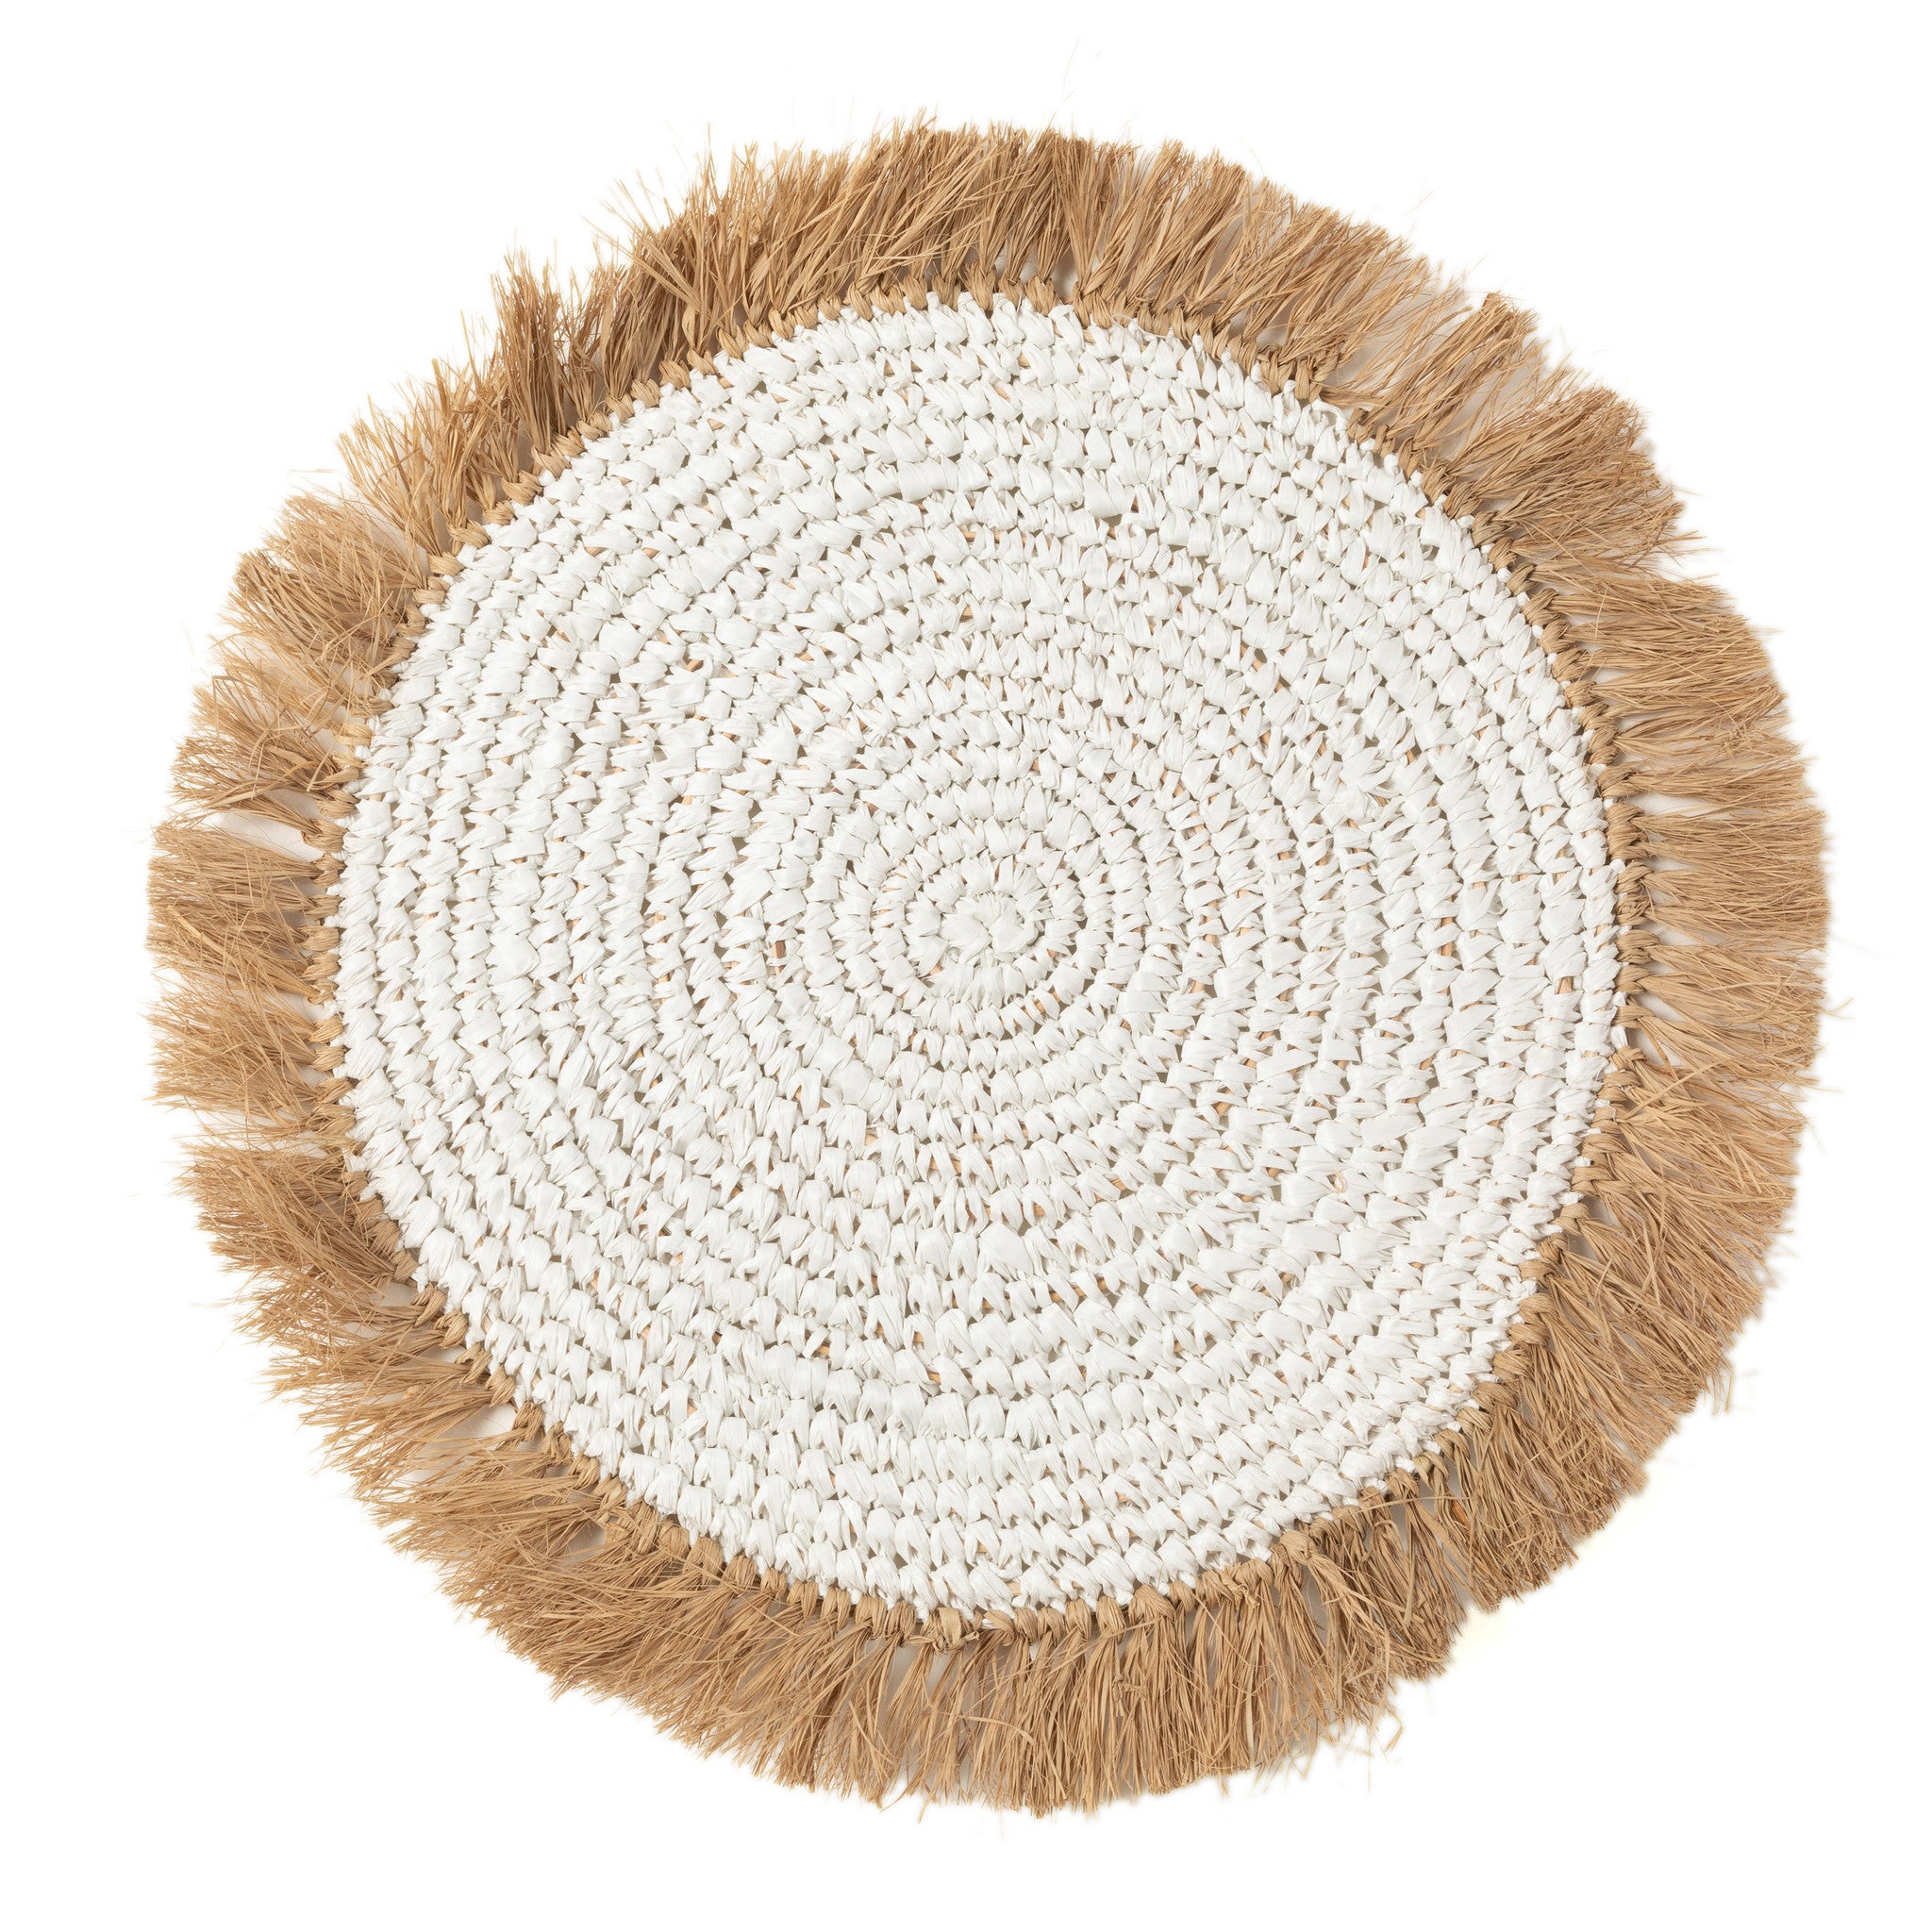 THE WATER HYACINTH RAFFIA Placemat White front view